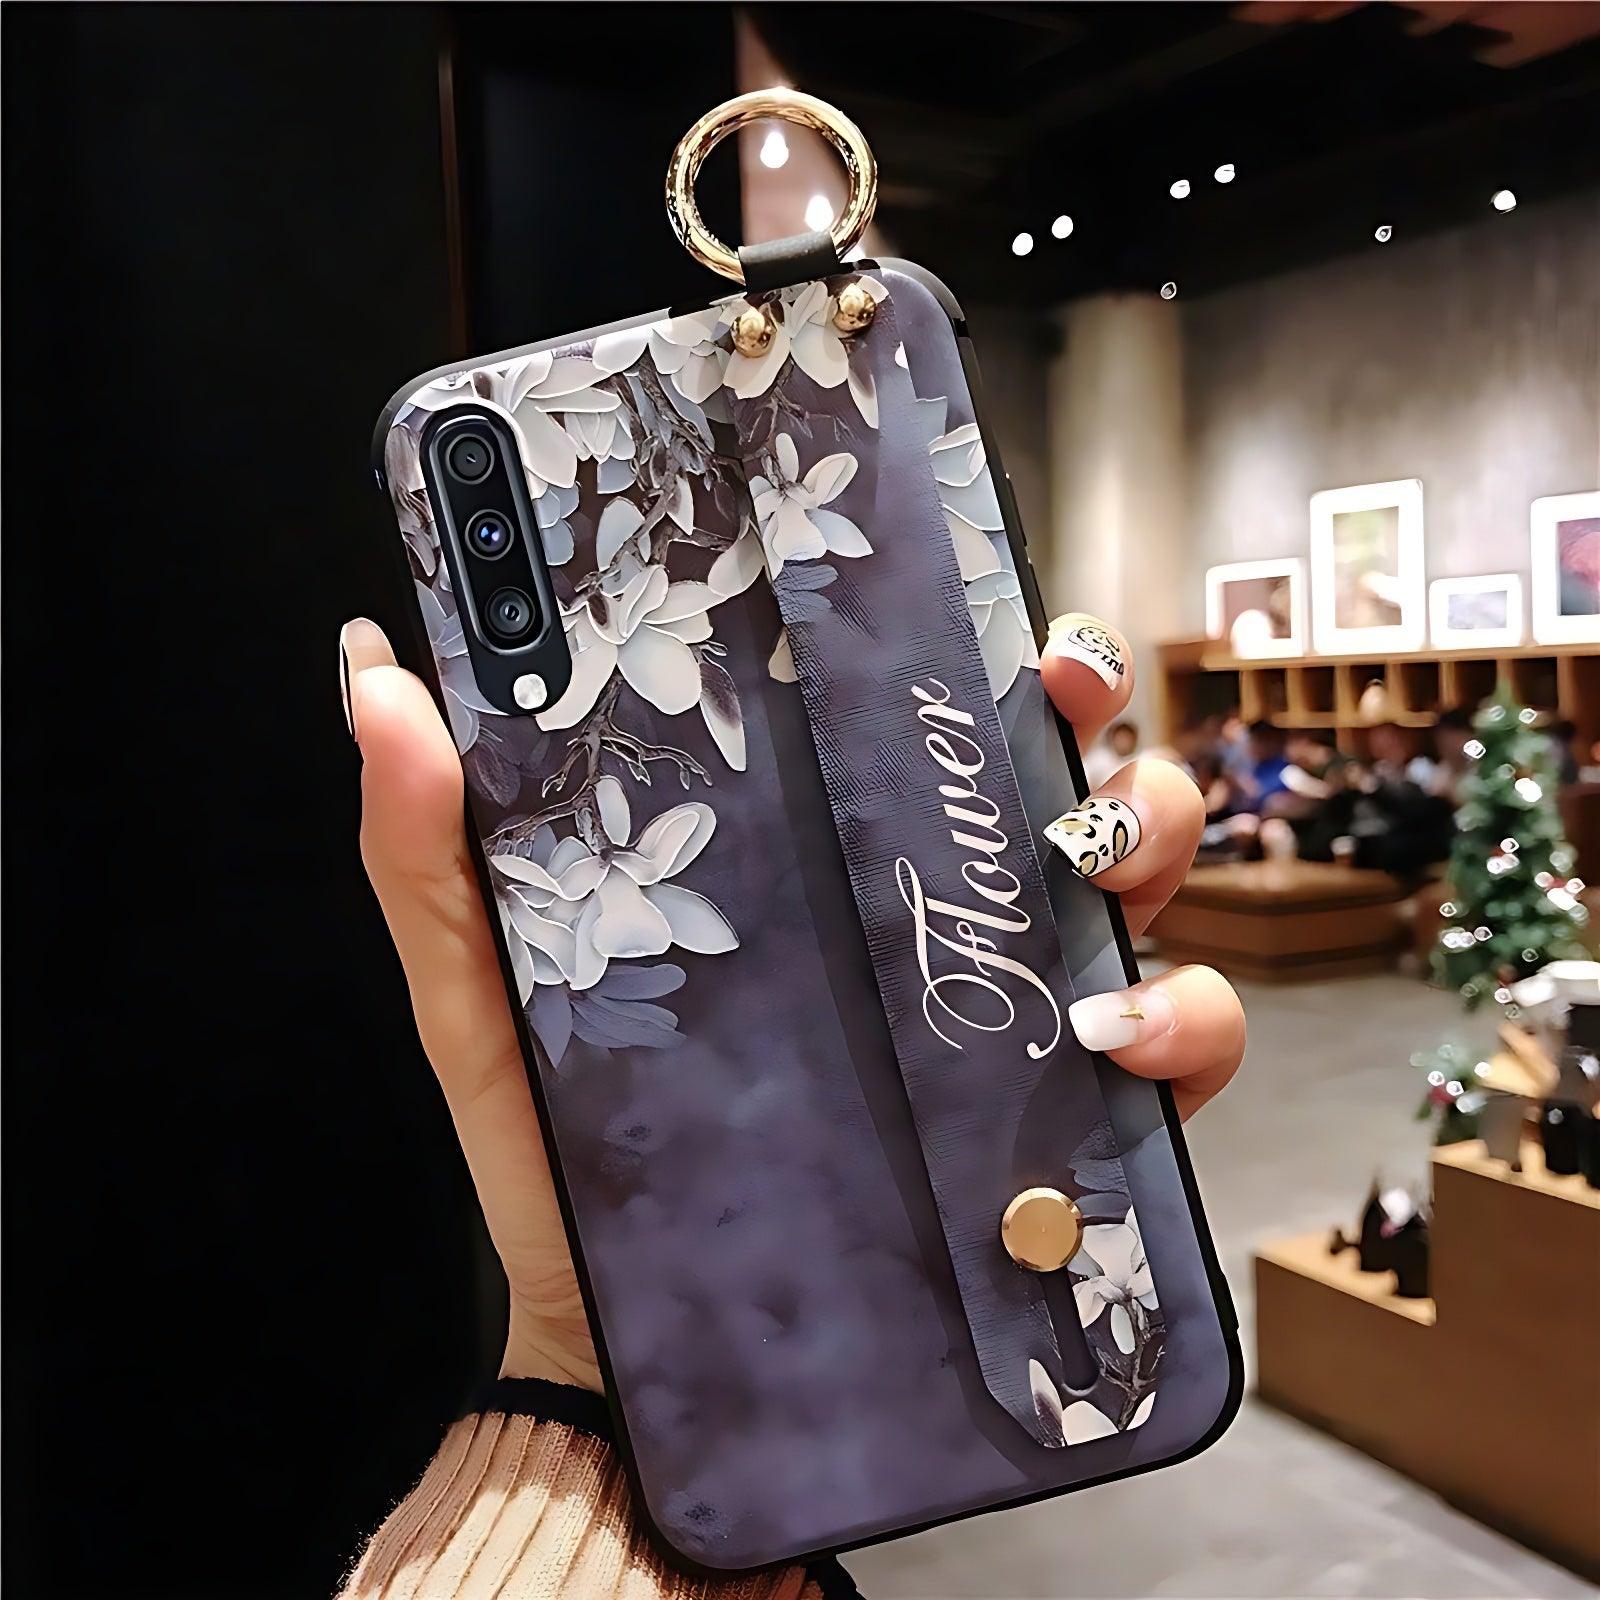 Galaxy S8 Plus Cute Phone Cases - Touchy Style .